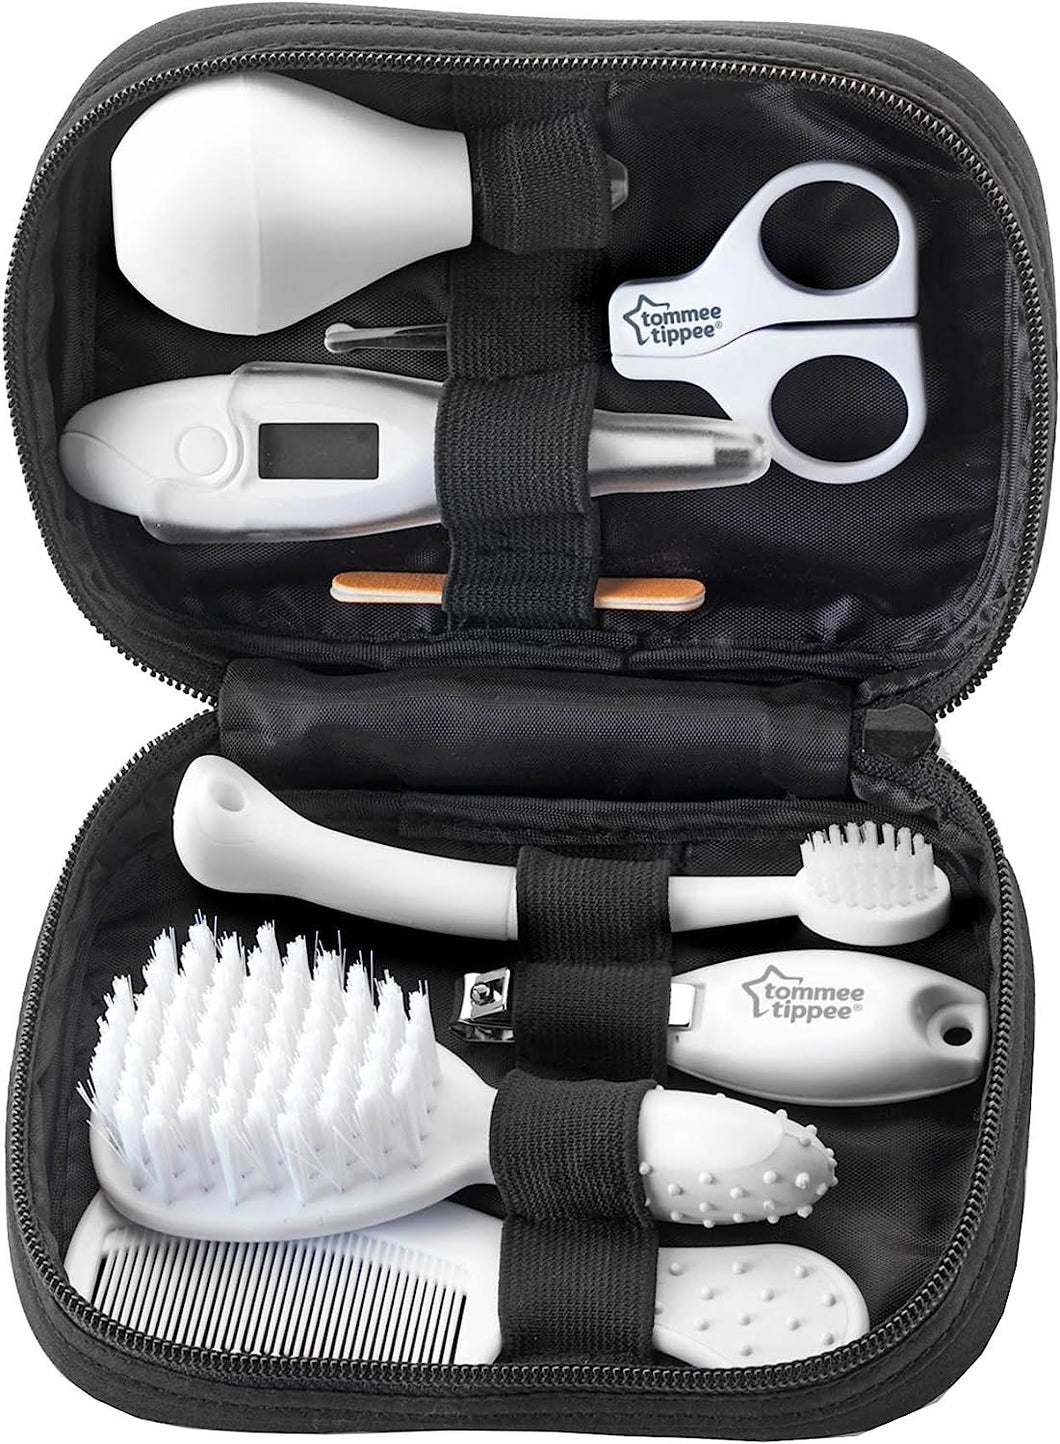 Baby Grooming and Healthcare Kit, Includes Digital Oral Thermometer, Nasal Aspirator, Brush and Comb, Scissors and Nail Clippers